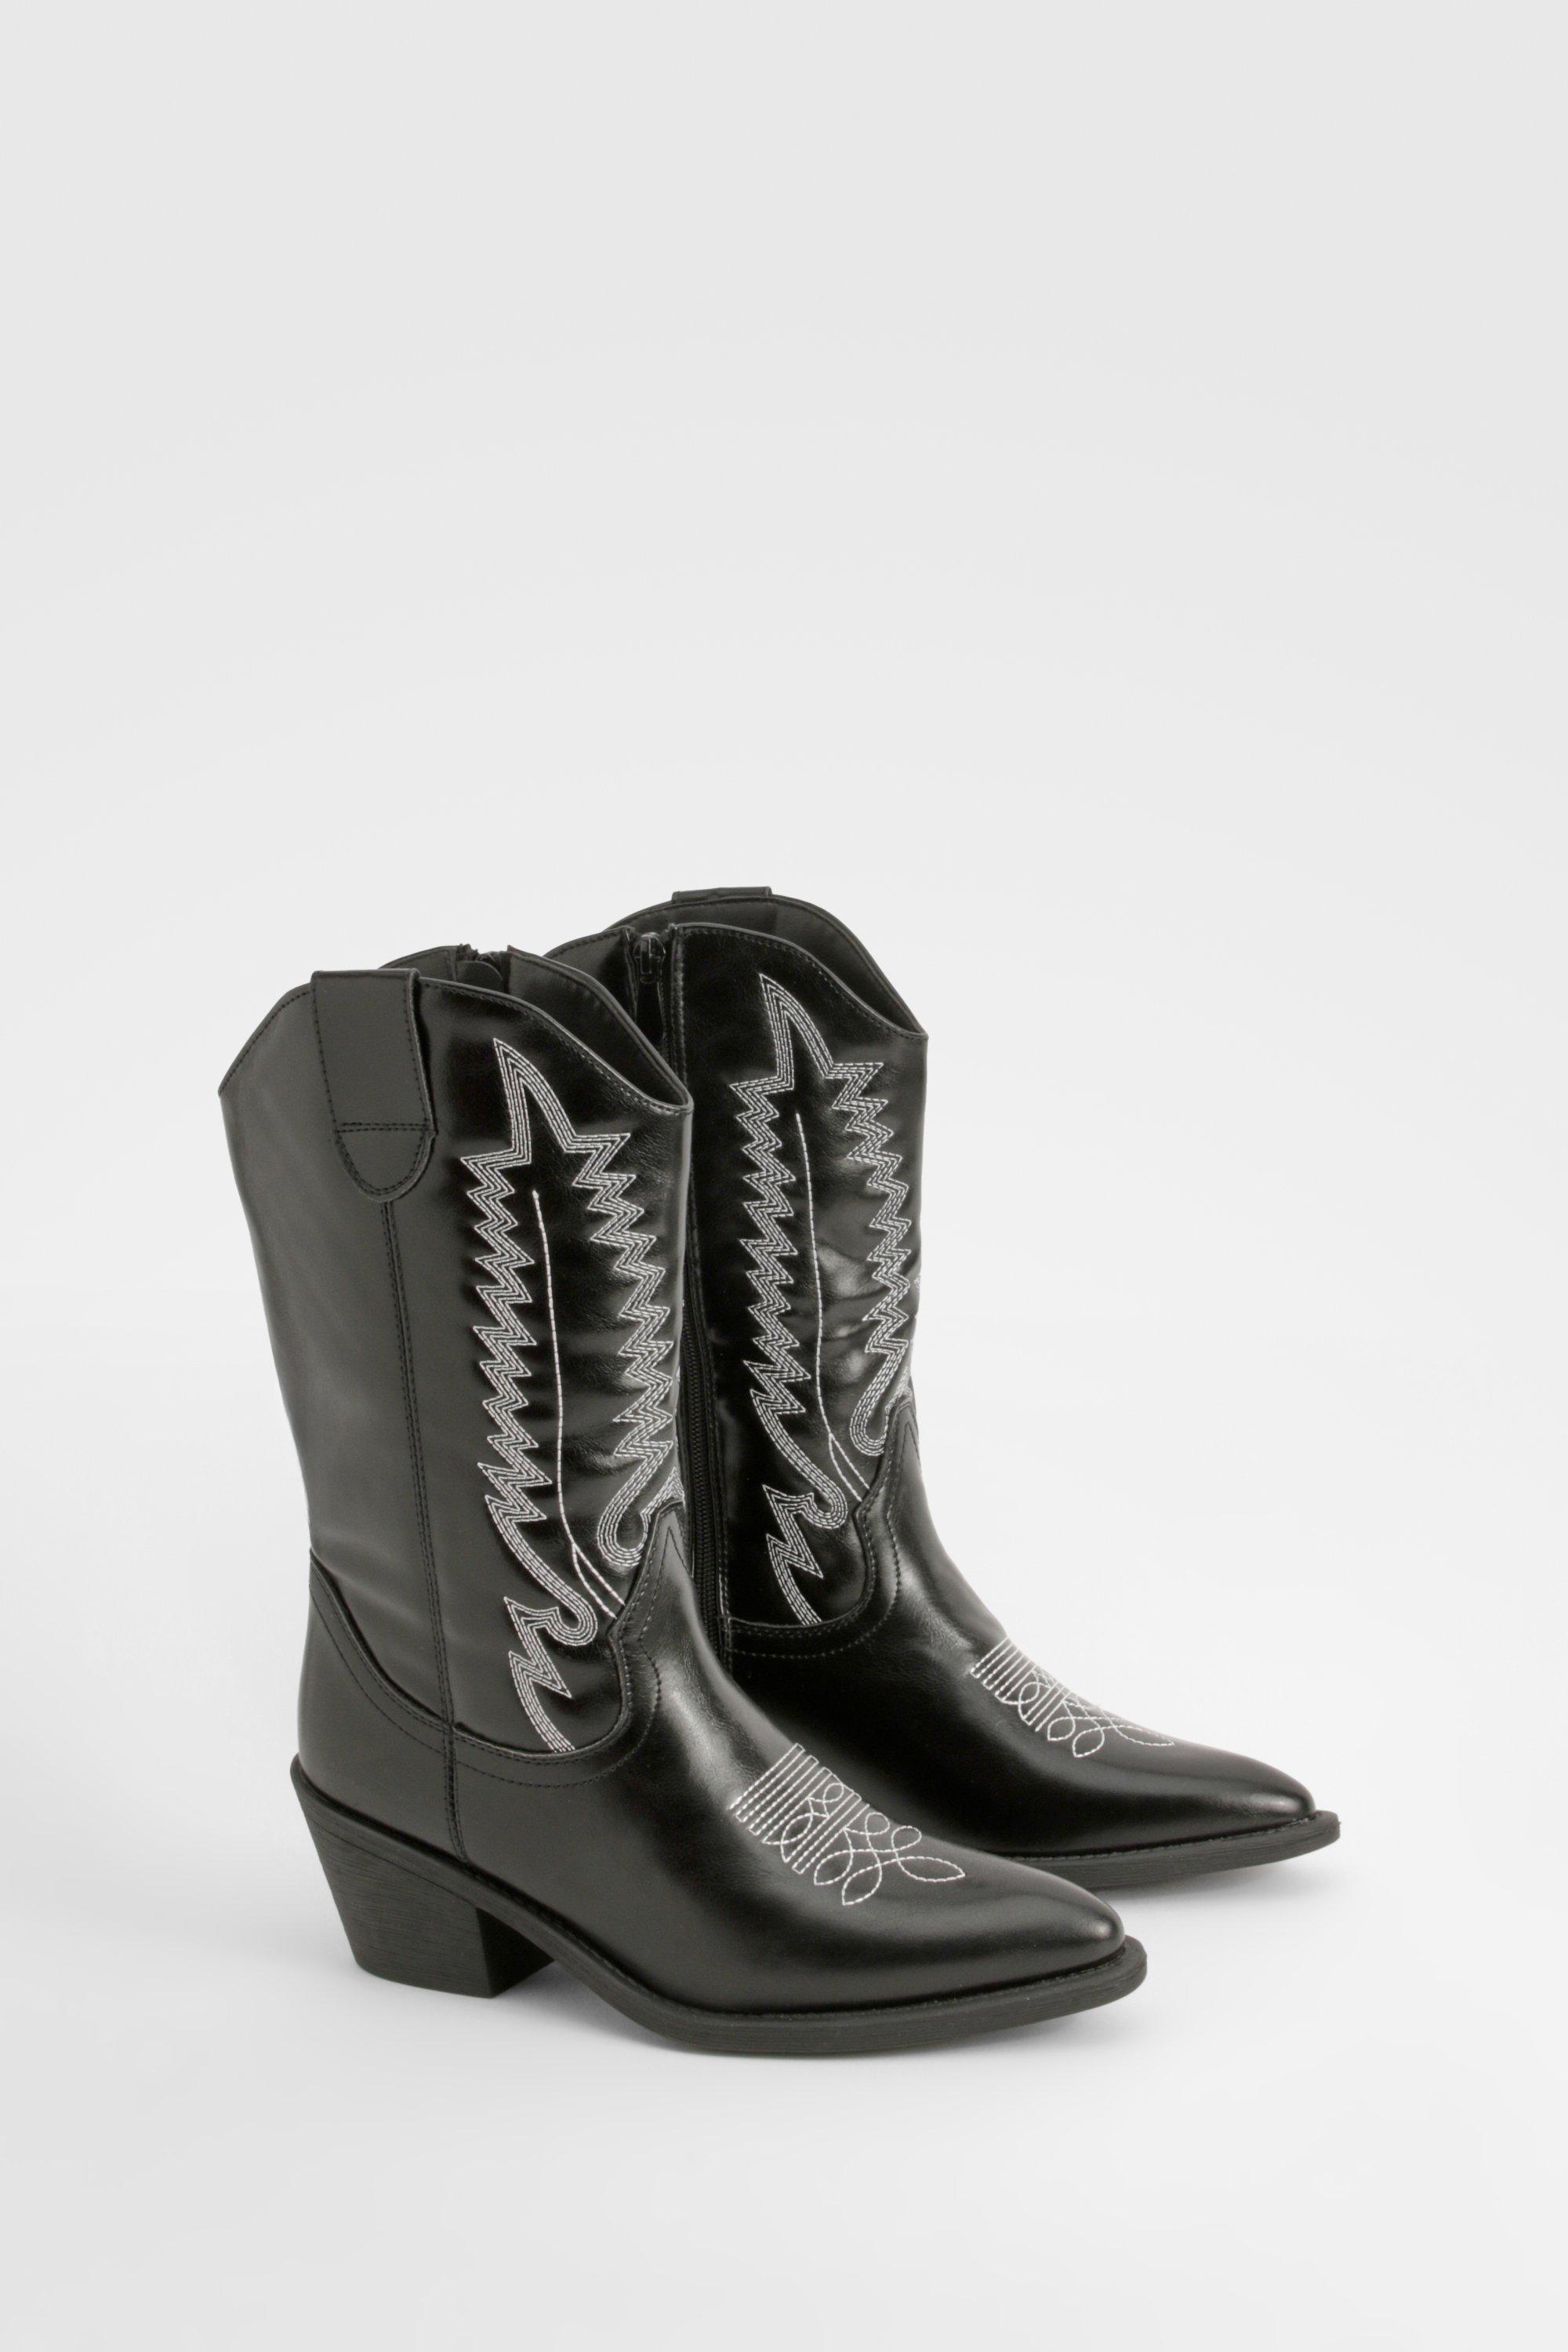 Boohoo Textured Embroidered Western Cowboy Boots, Black